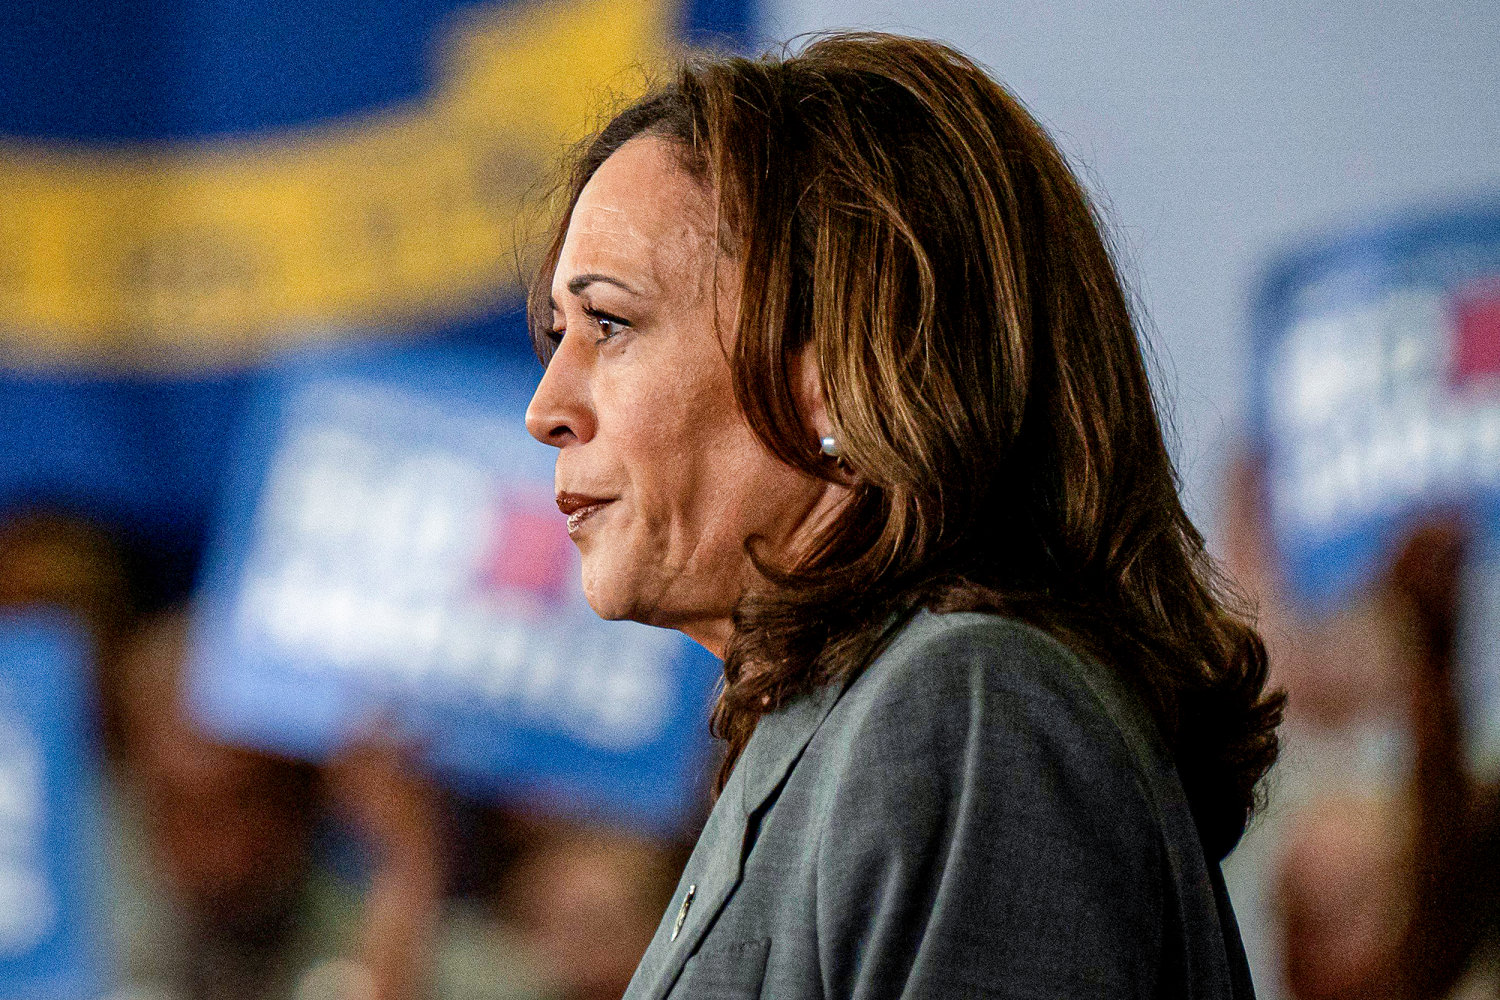 'Ludicrous': Donors leave call with Kamala Harris frustrated and annoyed